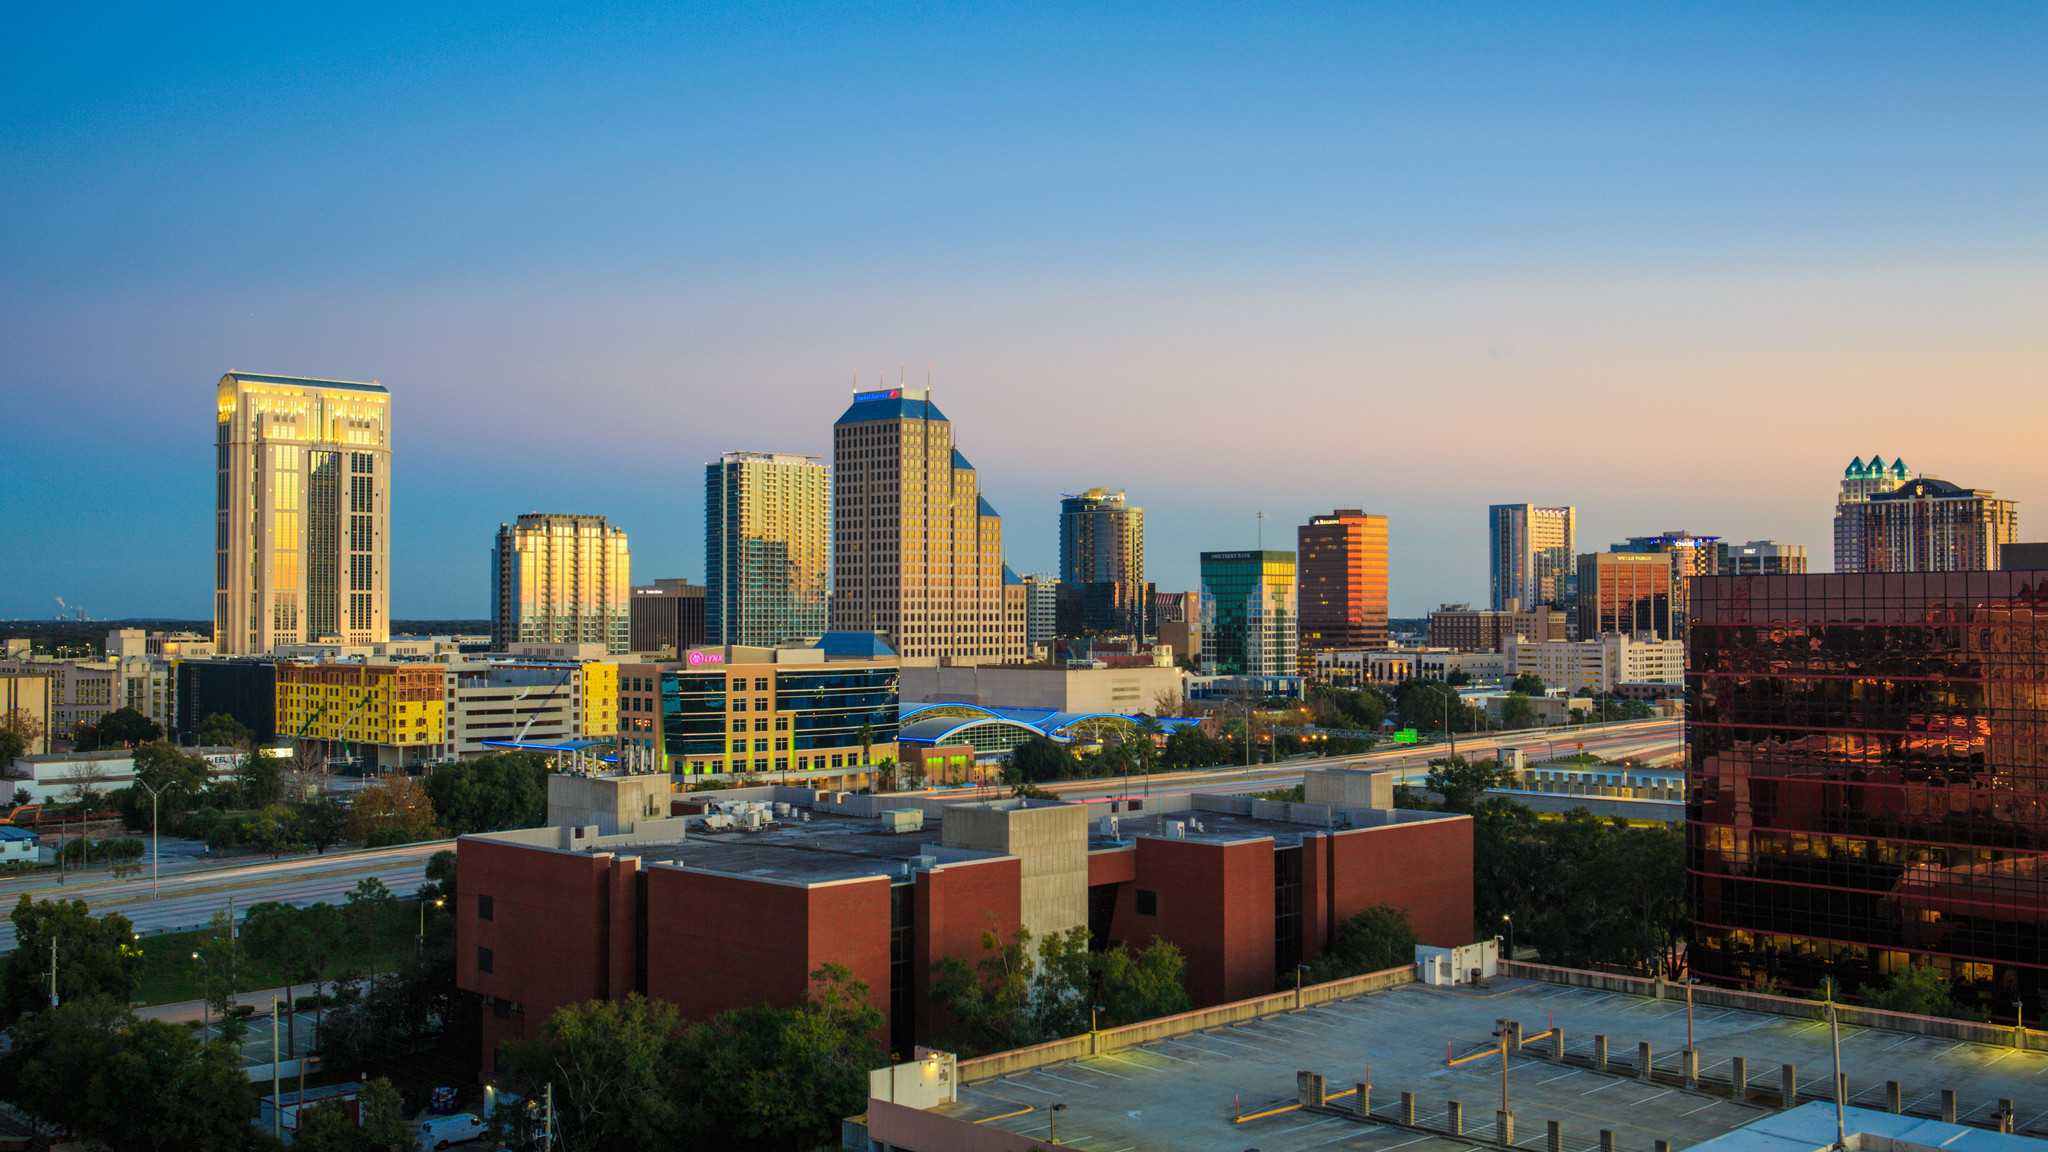 Downtown Orlando lacks a clear identity and distinctive skyline, committee finds ...2048 x 1152